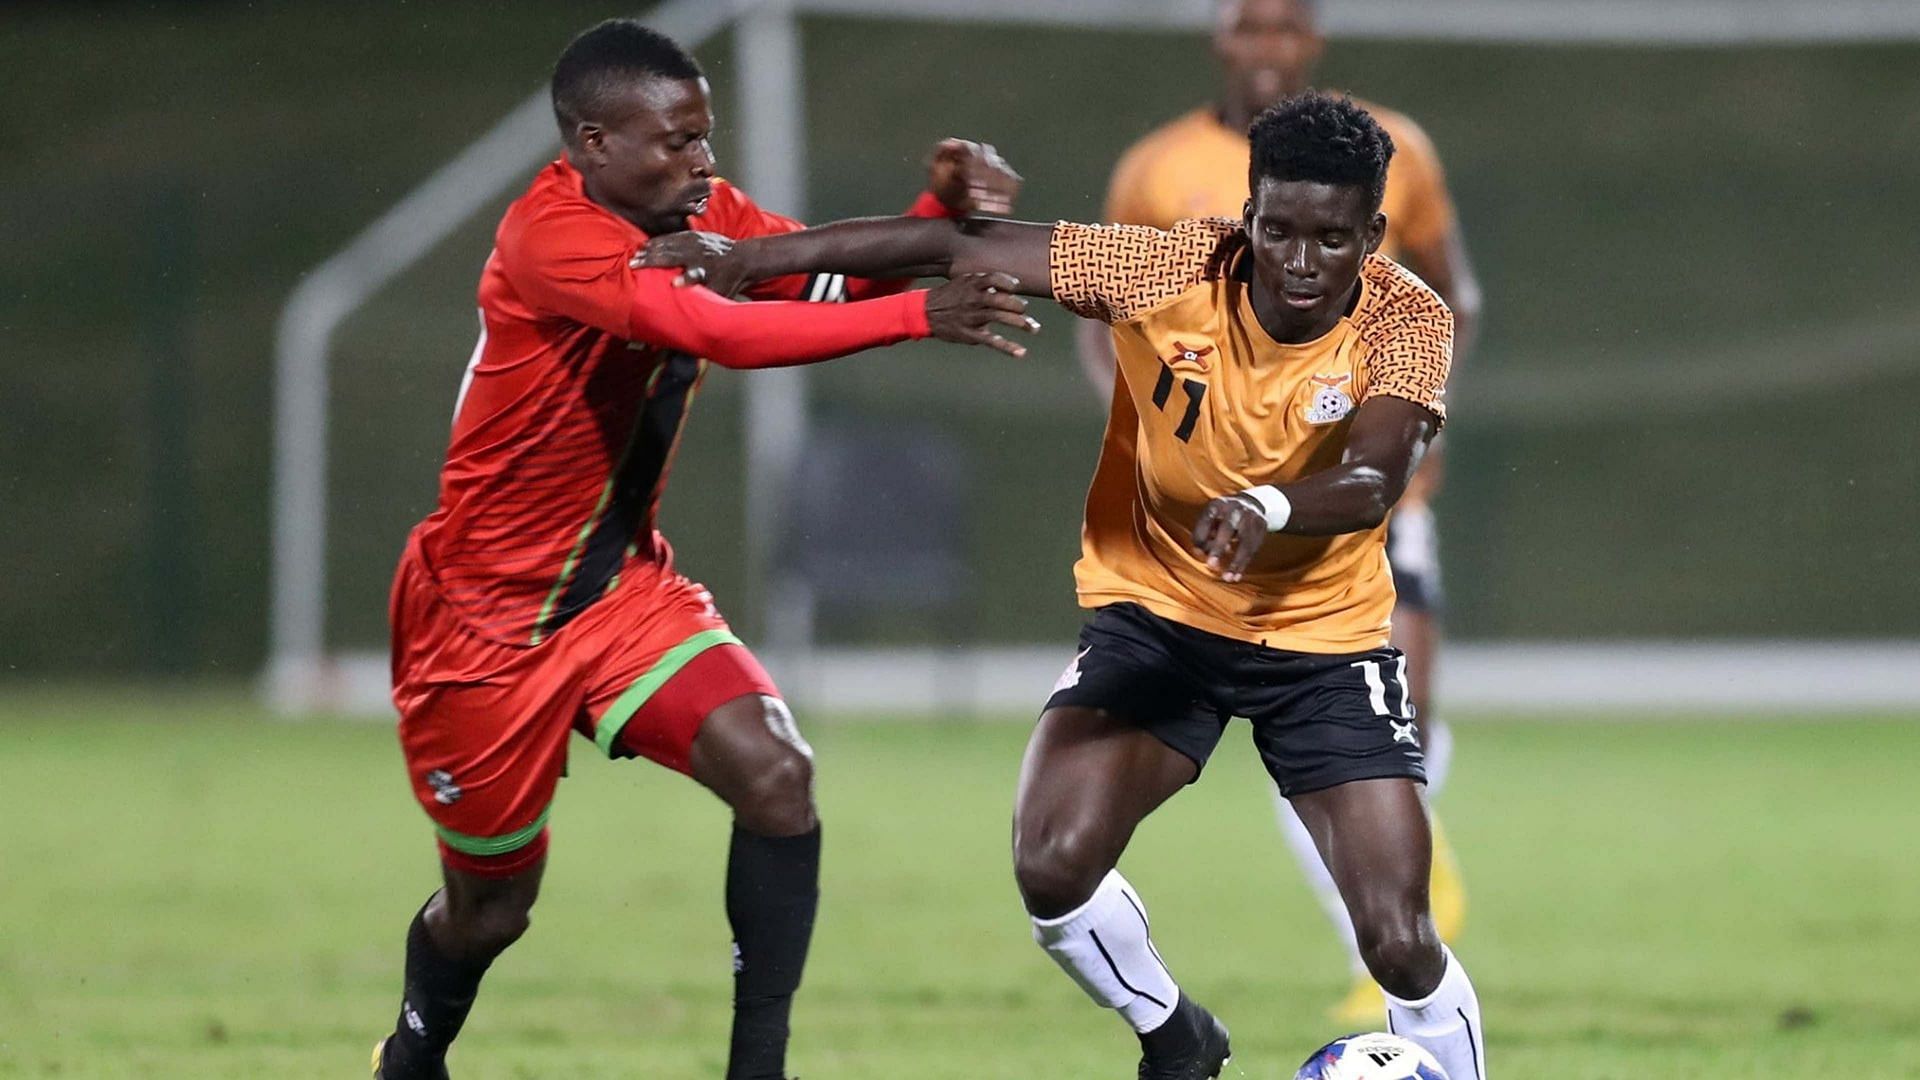 Zambia and Malawi meet in the COSAFA Cup on Thursday